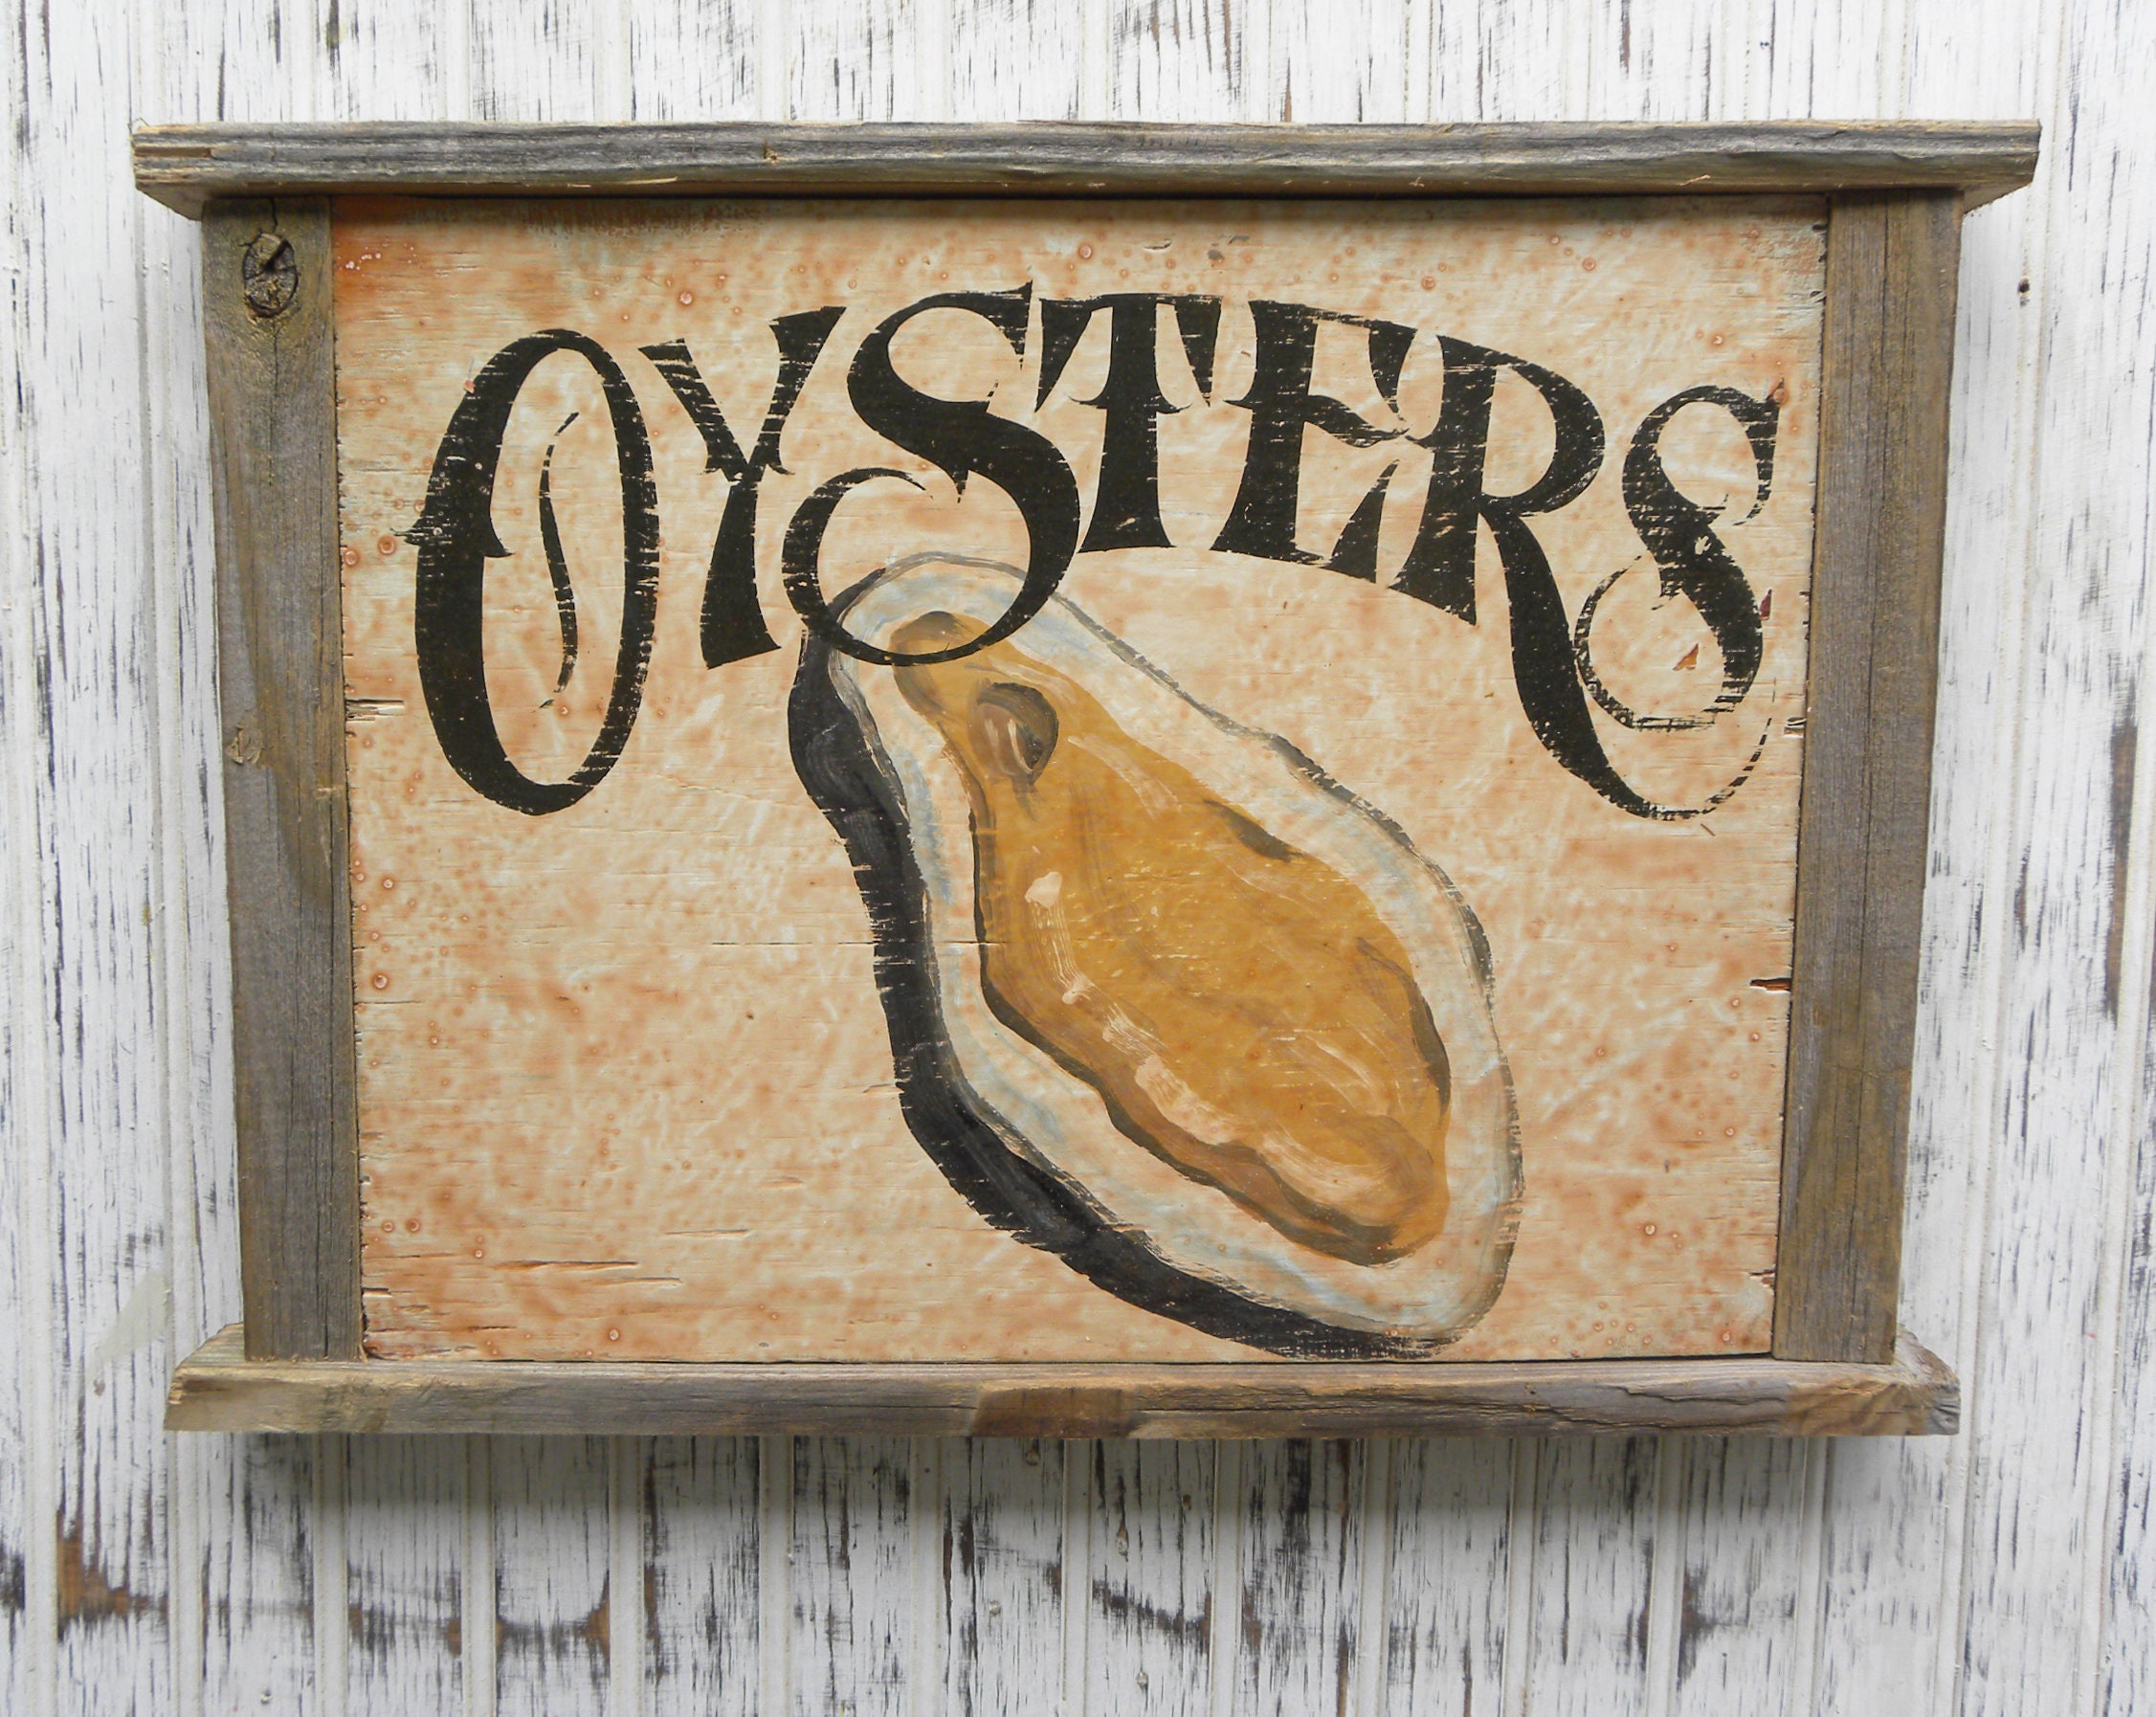 Oyster Sign, Hand Painted, Original Art Seafood Decor